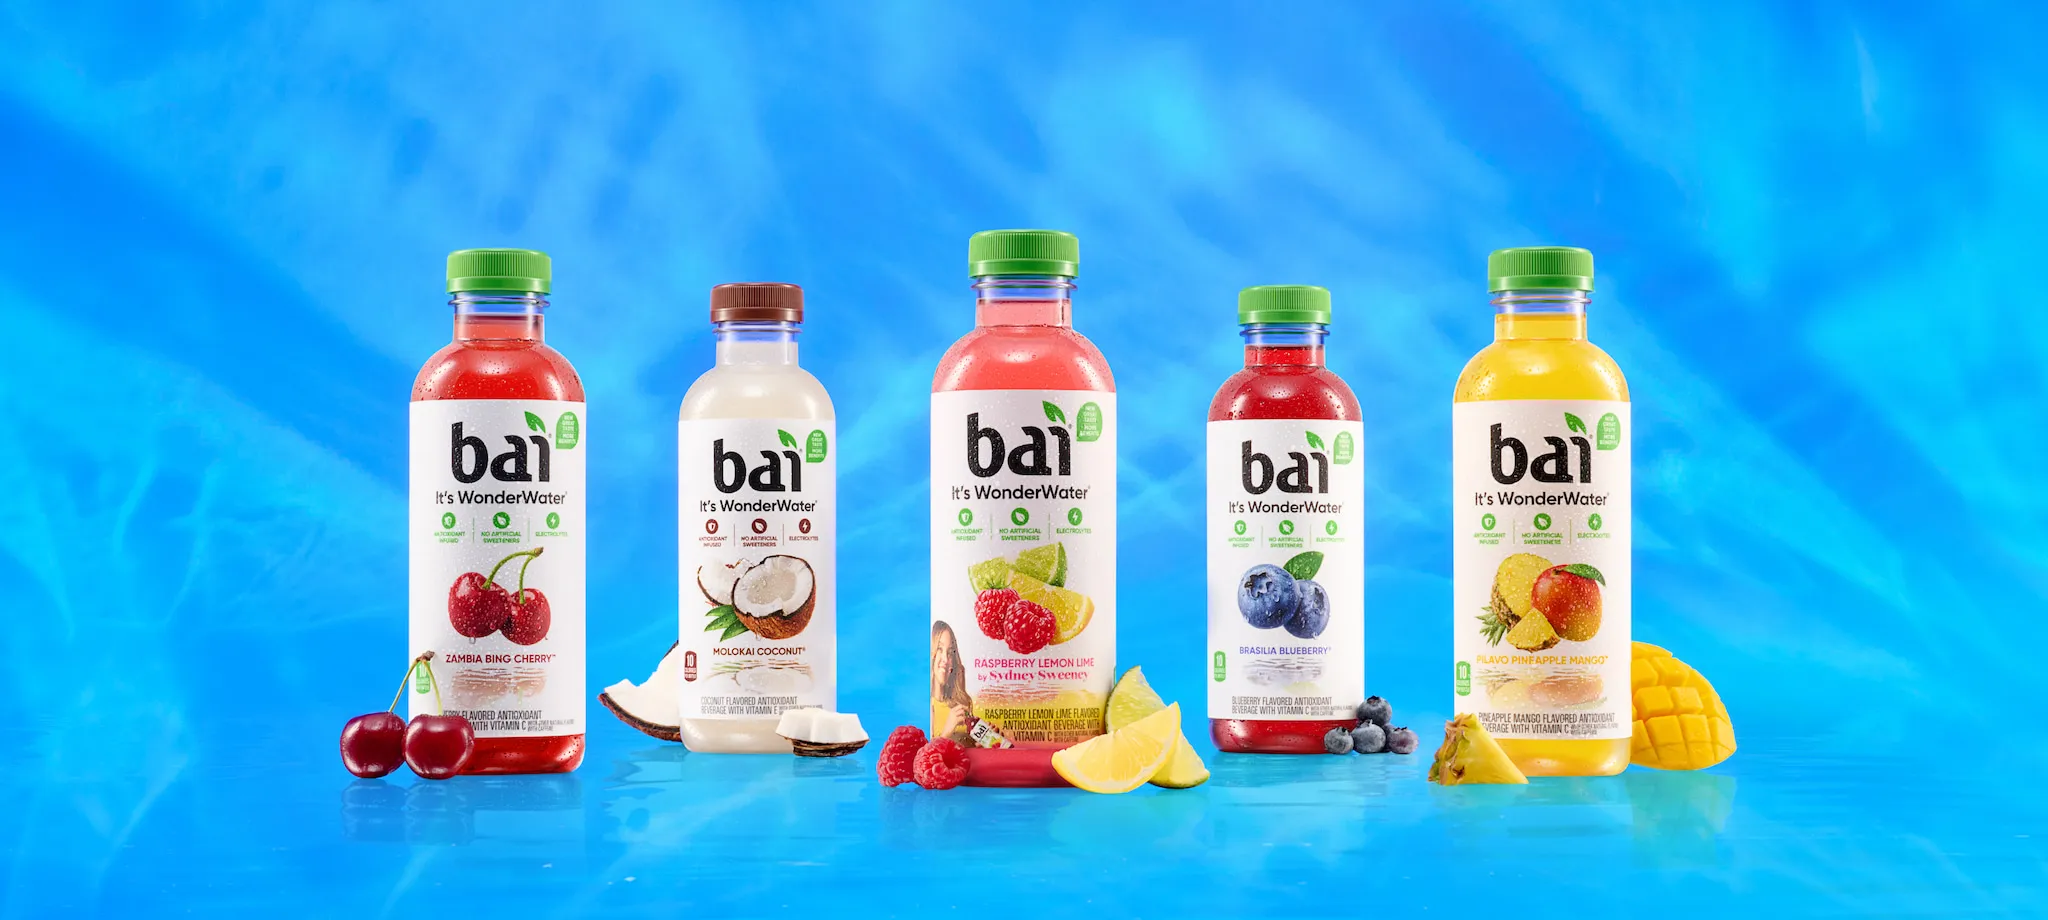 Bai Bottles and 6 packs next to fruit based on their respective flavors